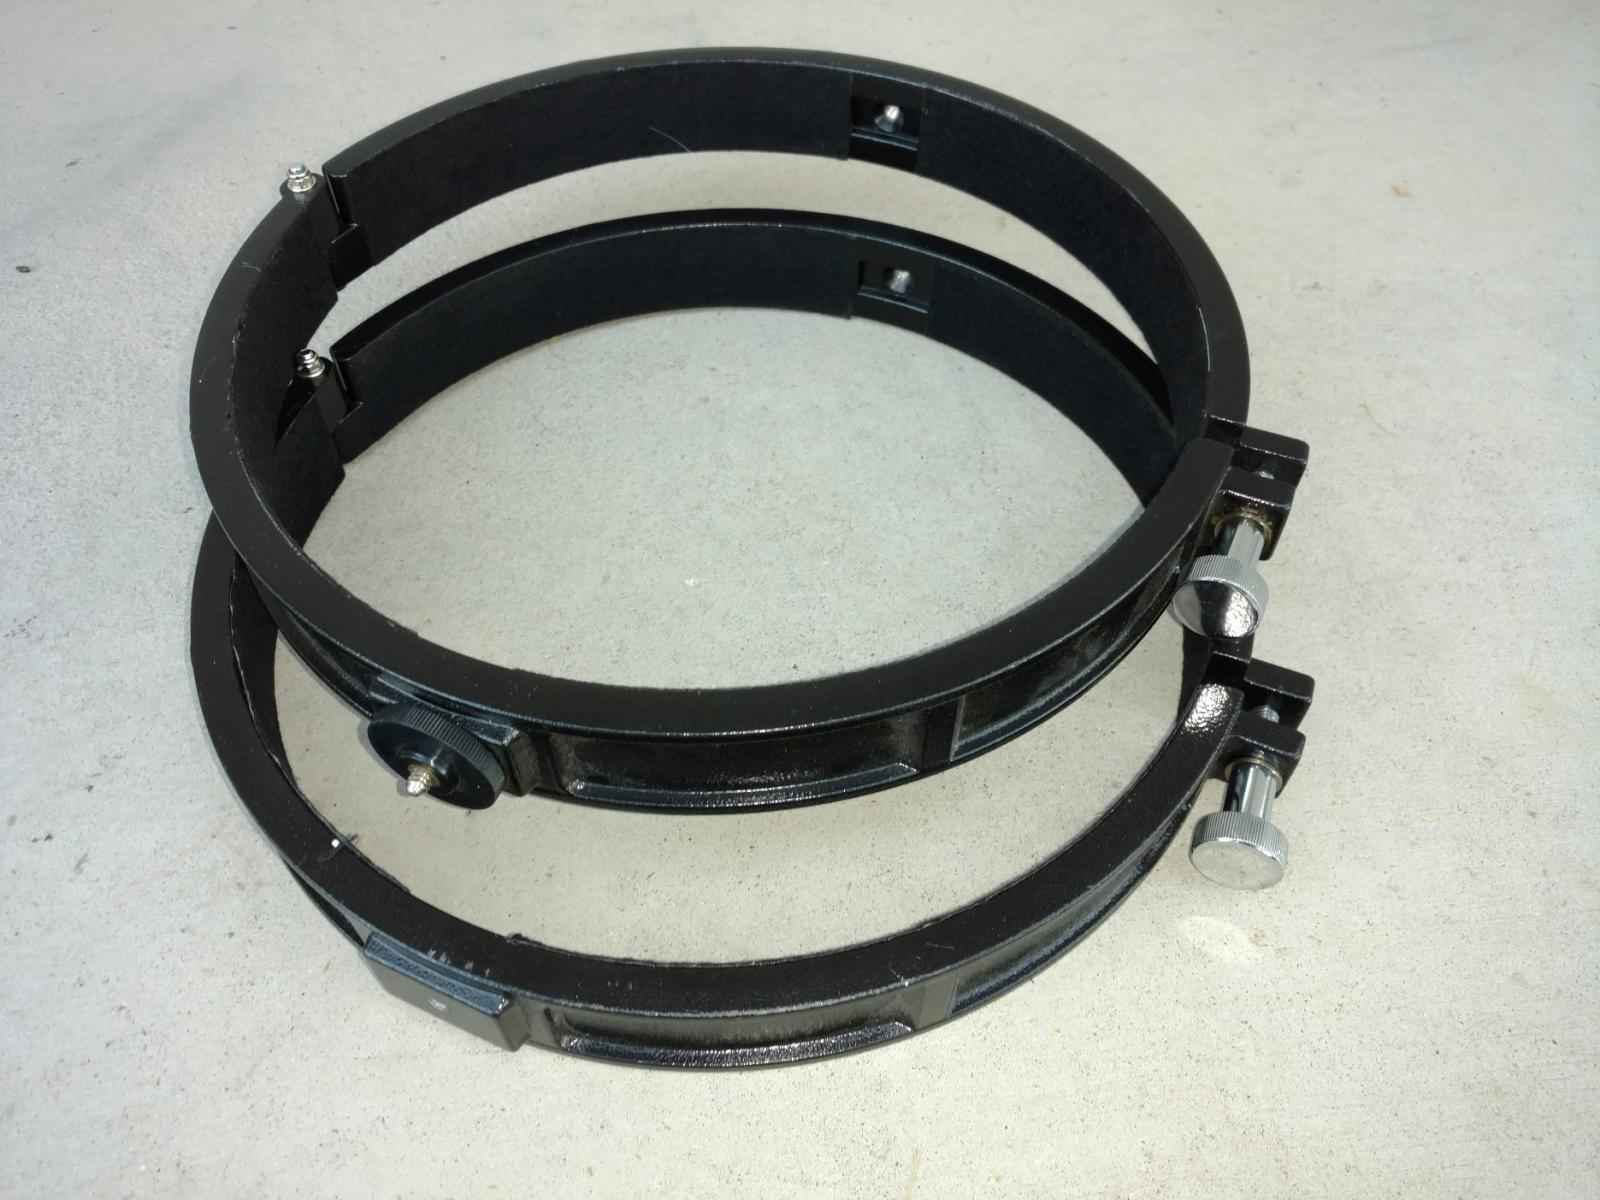 10" Orion Reflector Tube Rings - CN Classifieds - Cloudy Nights 222mm Telescope Tube Mounting Rings